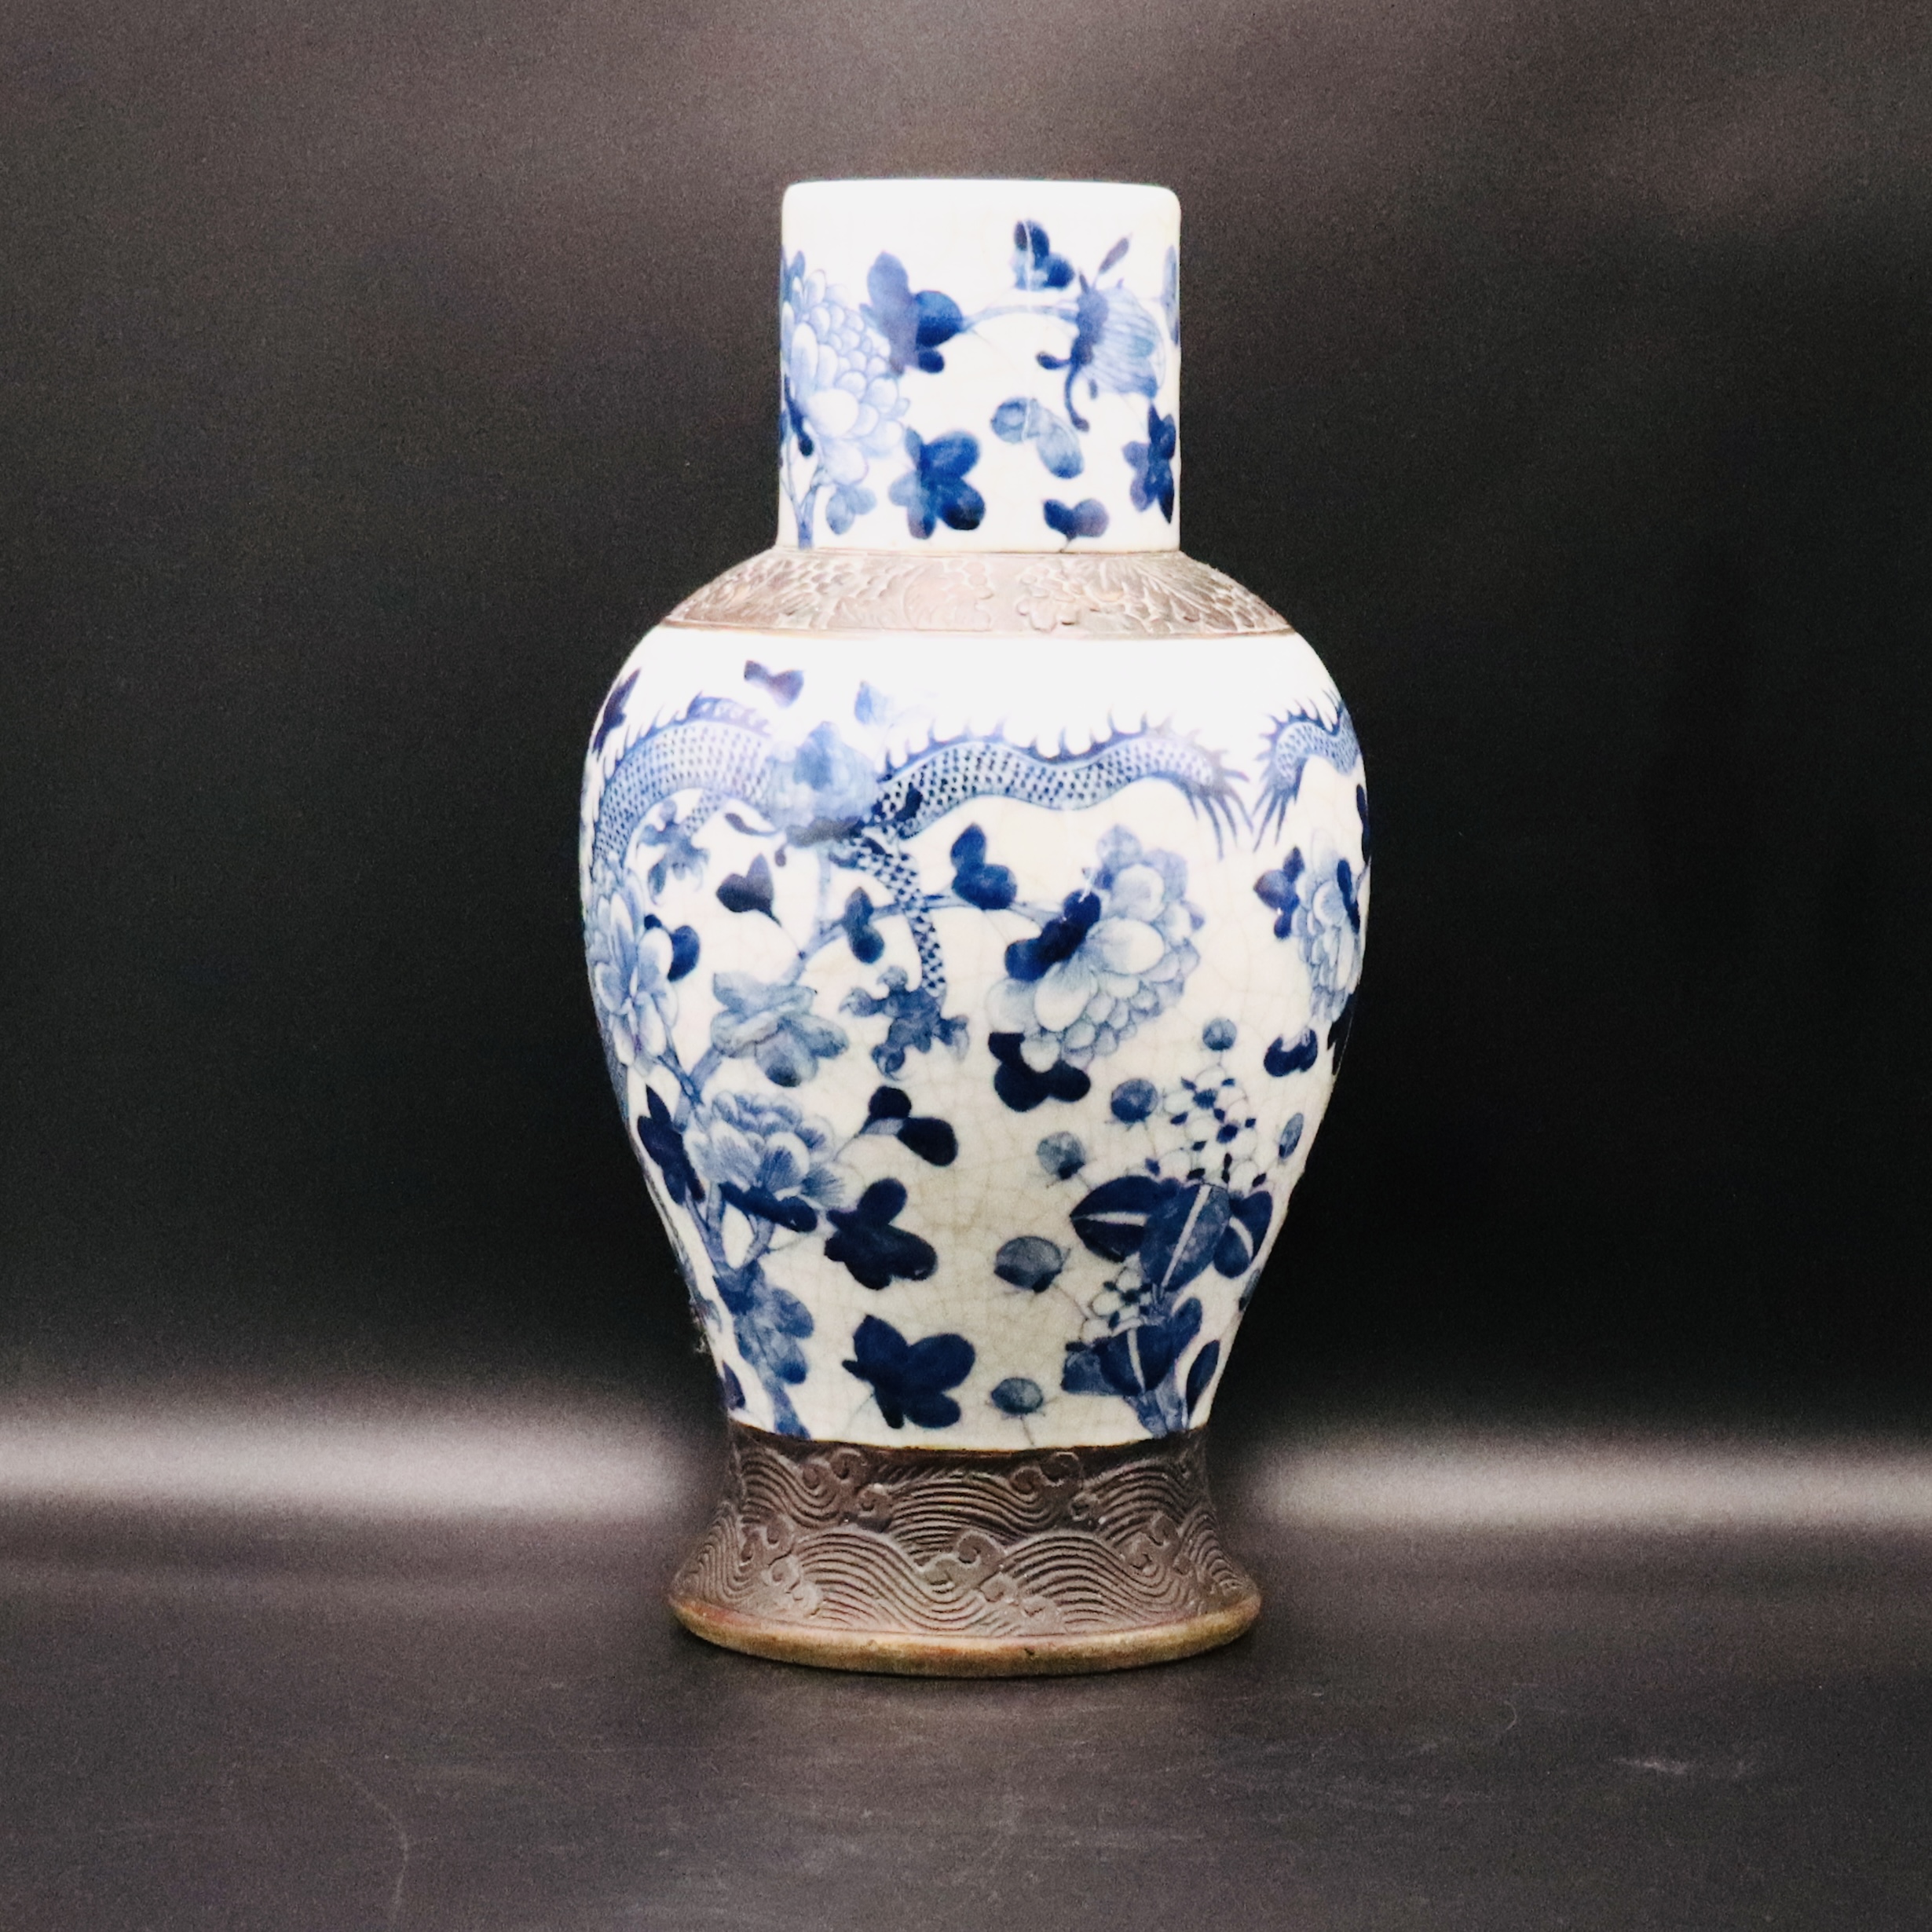 A CHINESE BLUE & WHITE CRACKLE VASE DEPICTING DRAGONS, 19TH CENTURY - Image 2 of 8